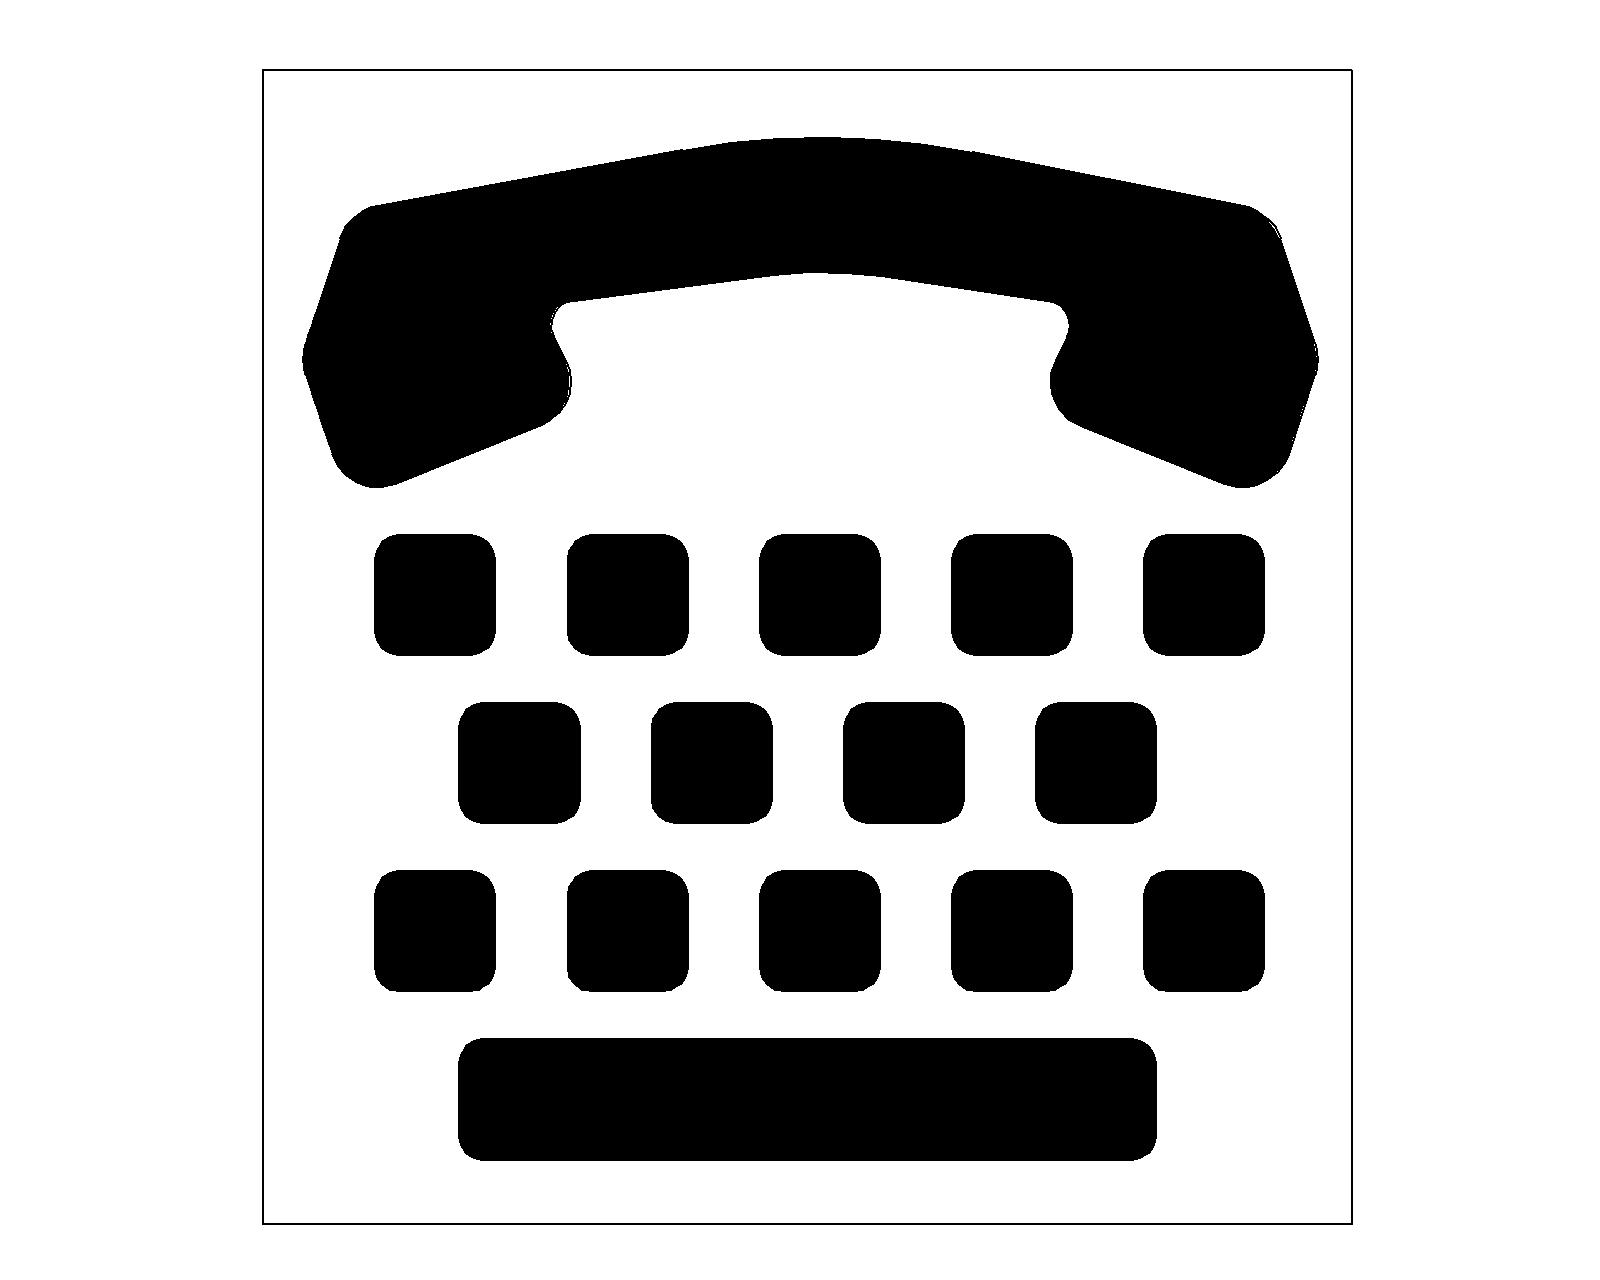 Pictogram of a TTY showing the keyboard and space bar typical of most devices and the shape of a telephone handset at the top.